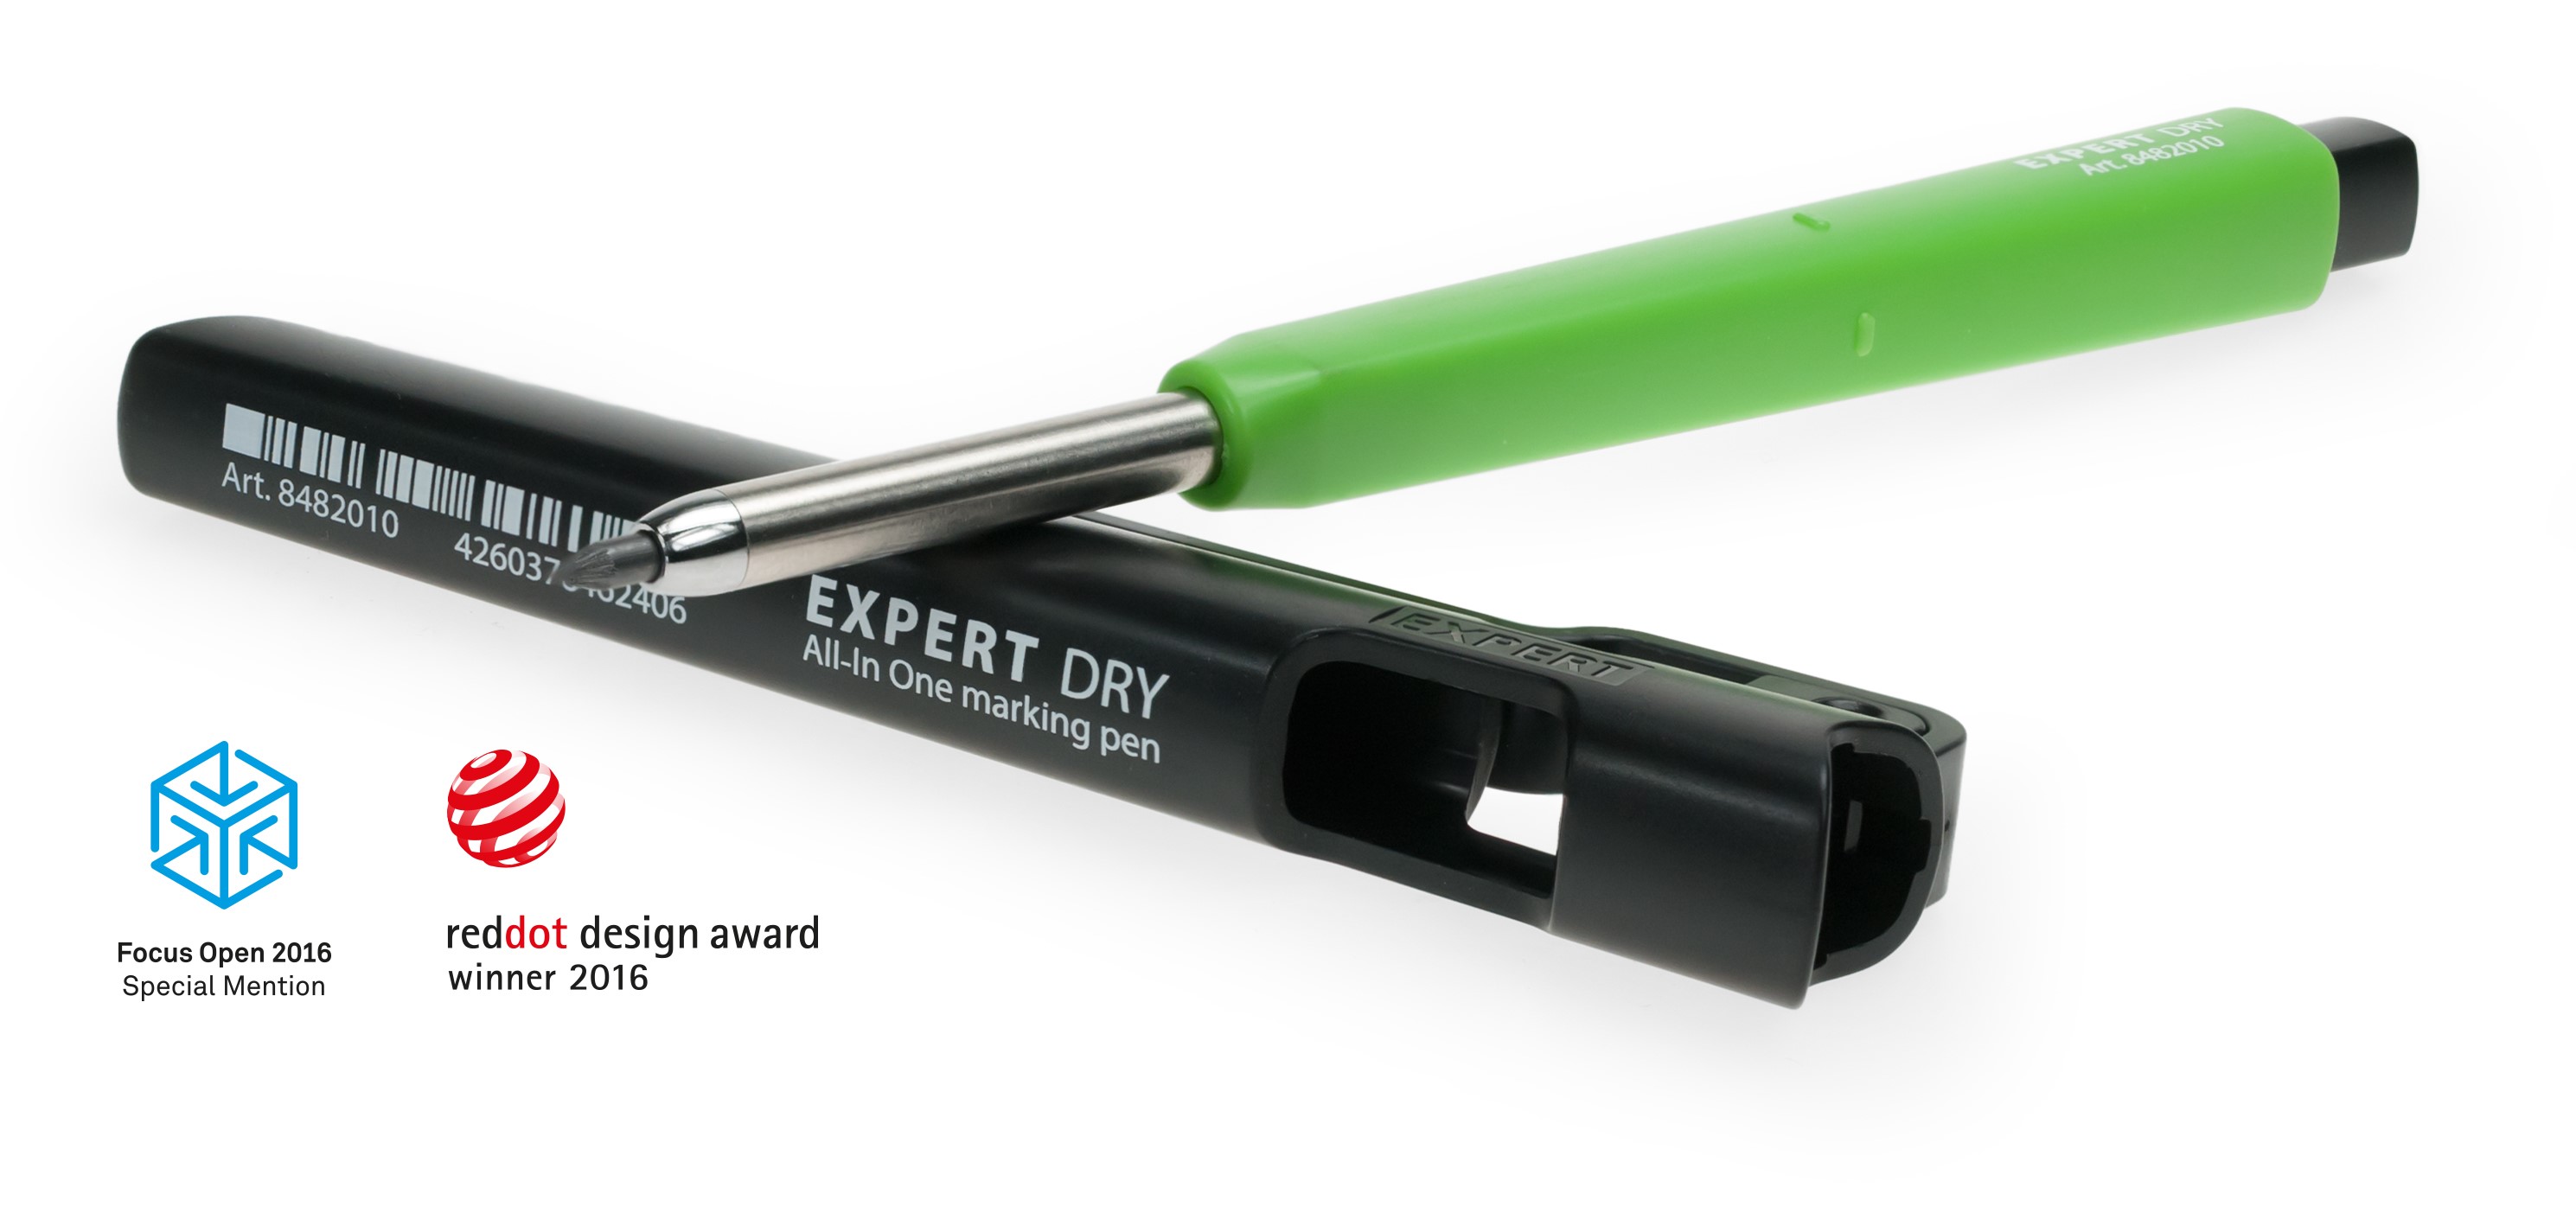 EXPERT DRY ALL-IN-ONE marking pen 